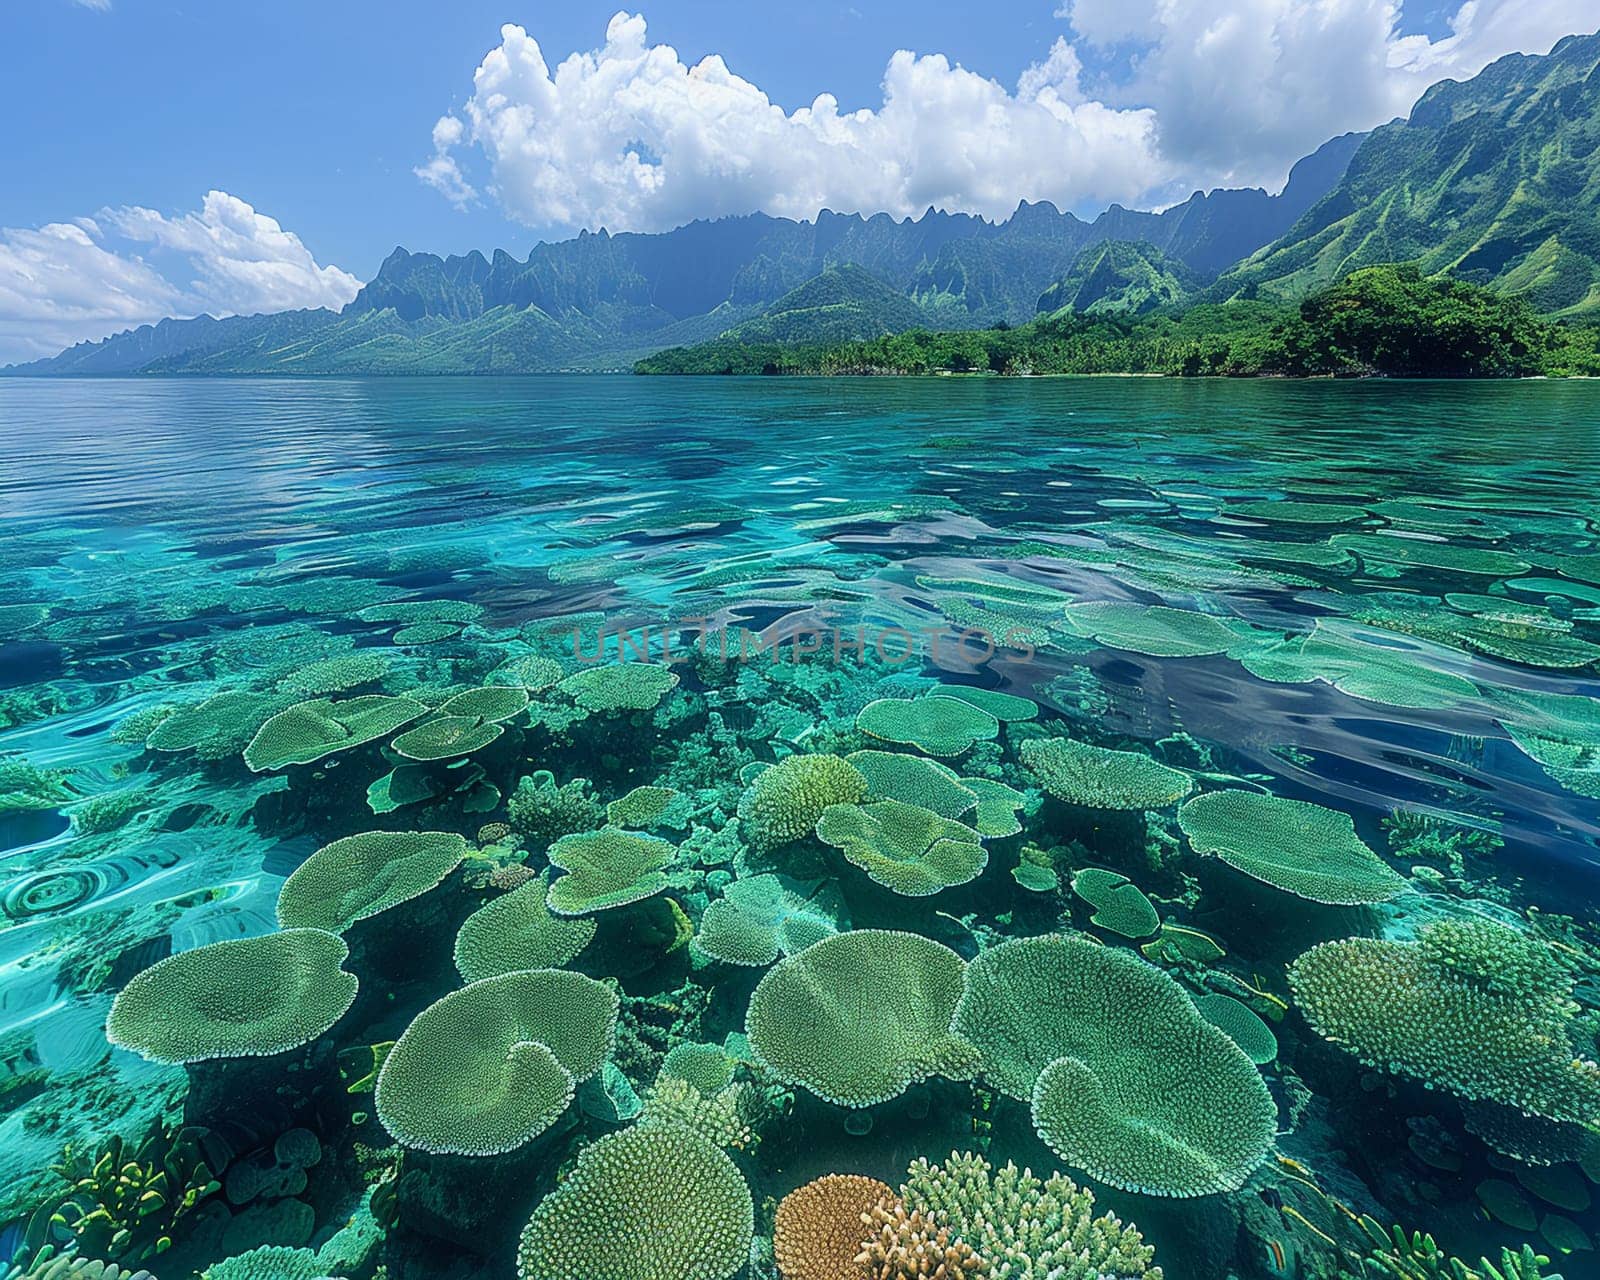 Shallow coral reef with clear water above, capturing tropical marine ecosystems.